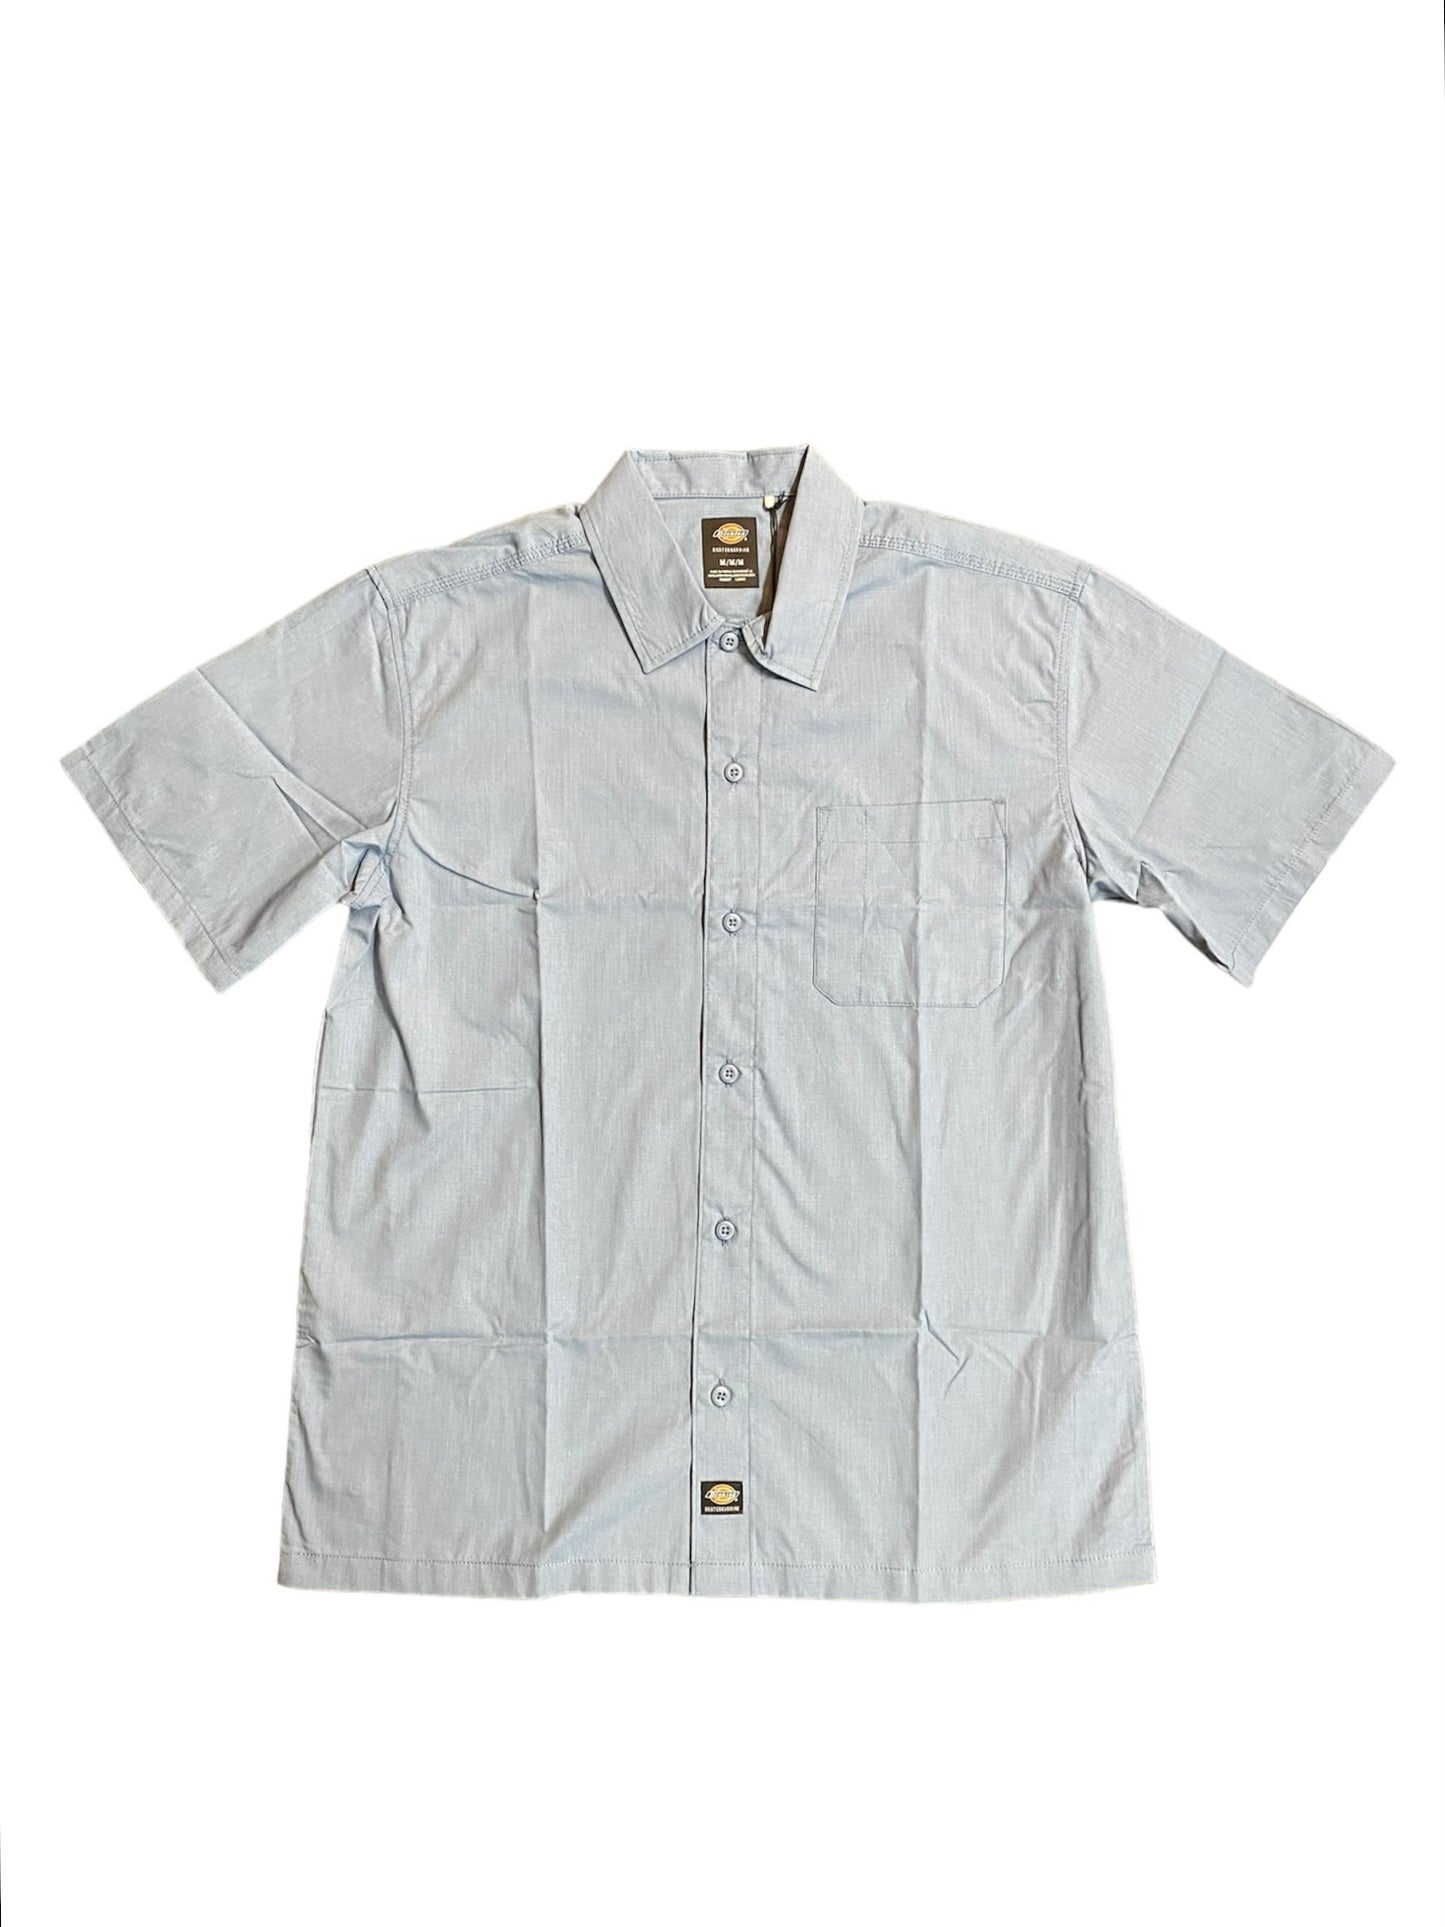 Dickies Woven Button Up S/S Shirt